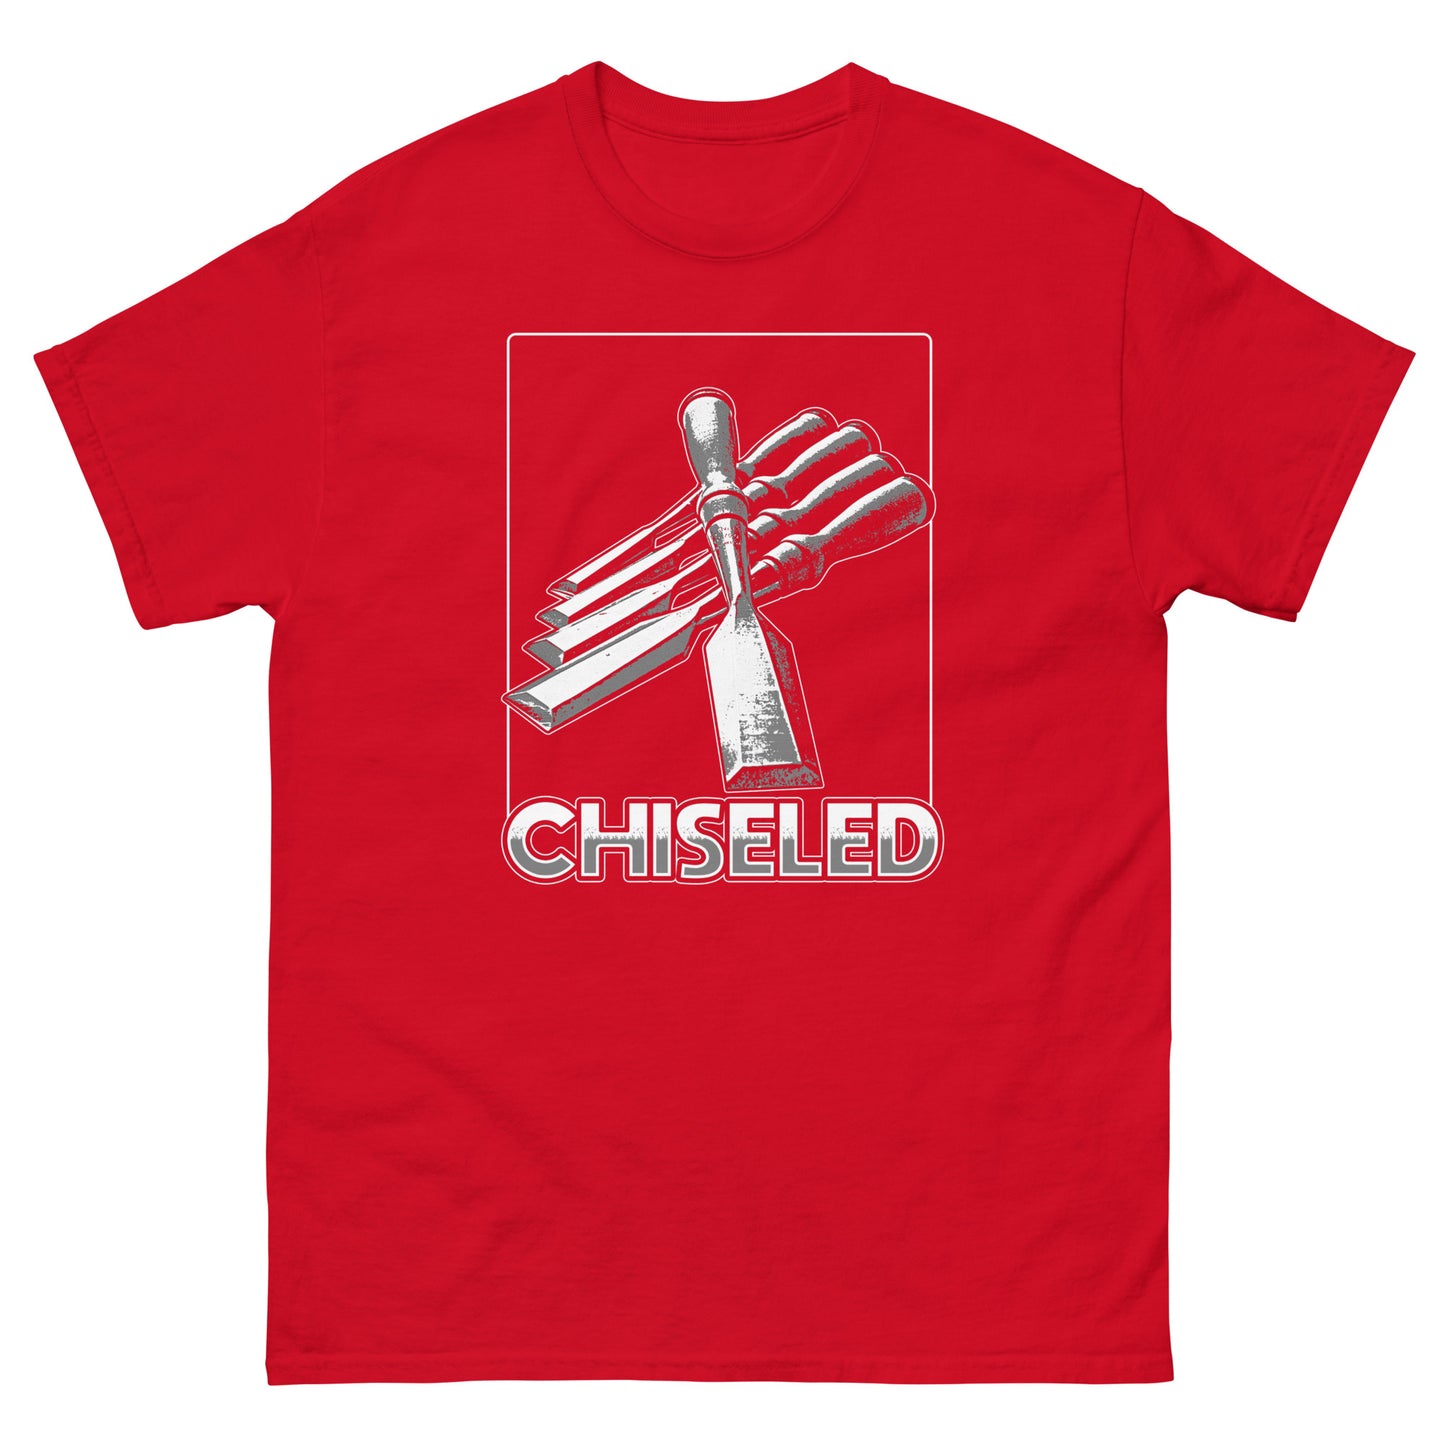 "Chiseled" Woodworking T-Shirt (Multiple Colors)